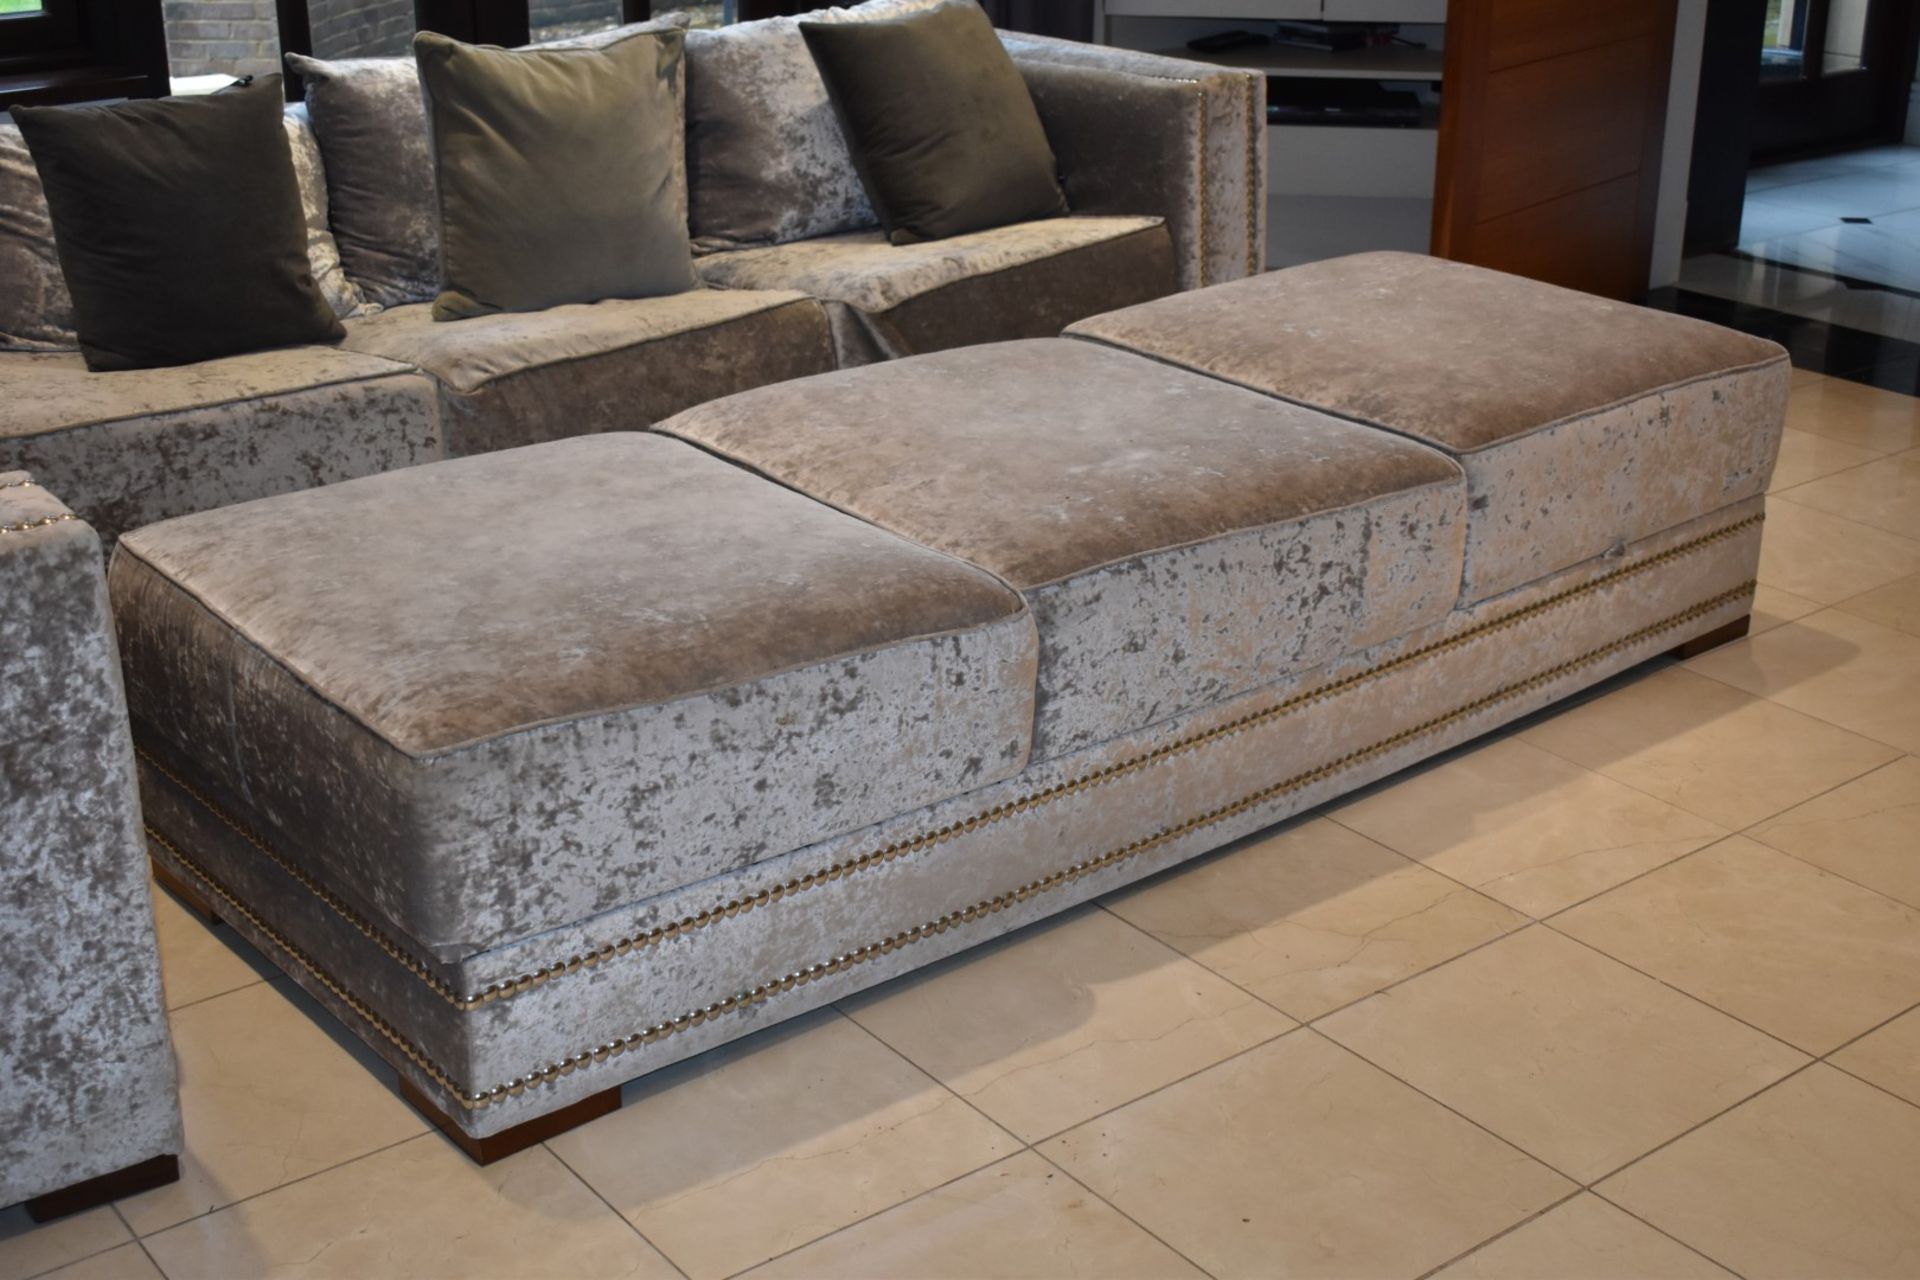 1 x Bespoke Handcrafted Corner Sofa With Ottoman Storage Footstool - Image 12 of 15